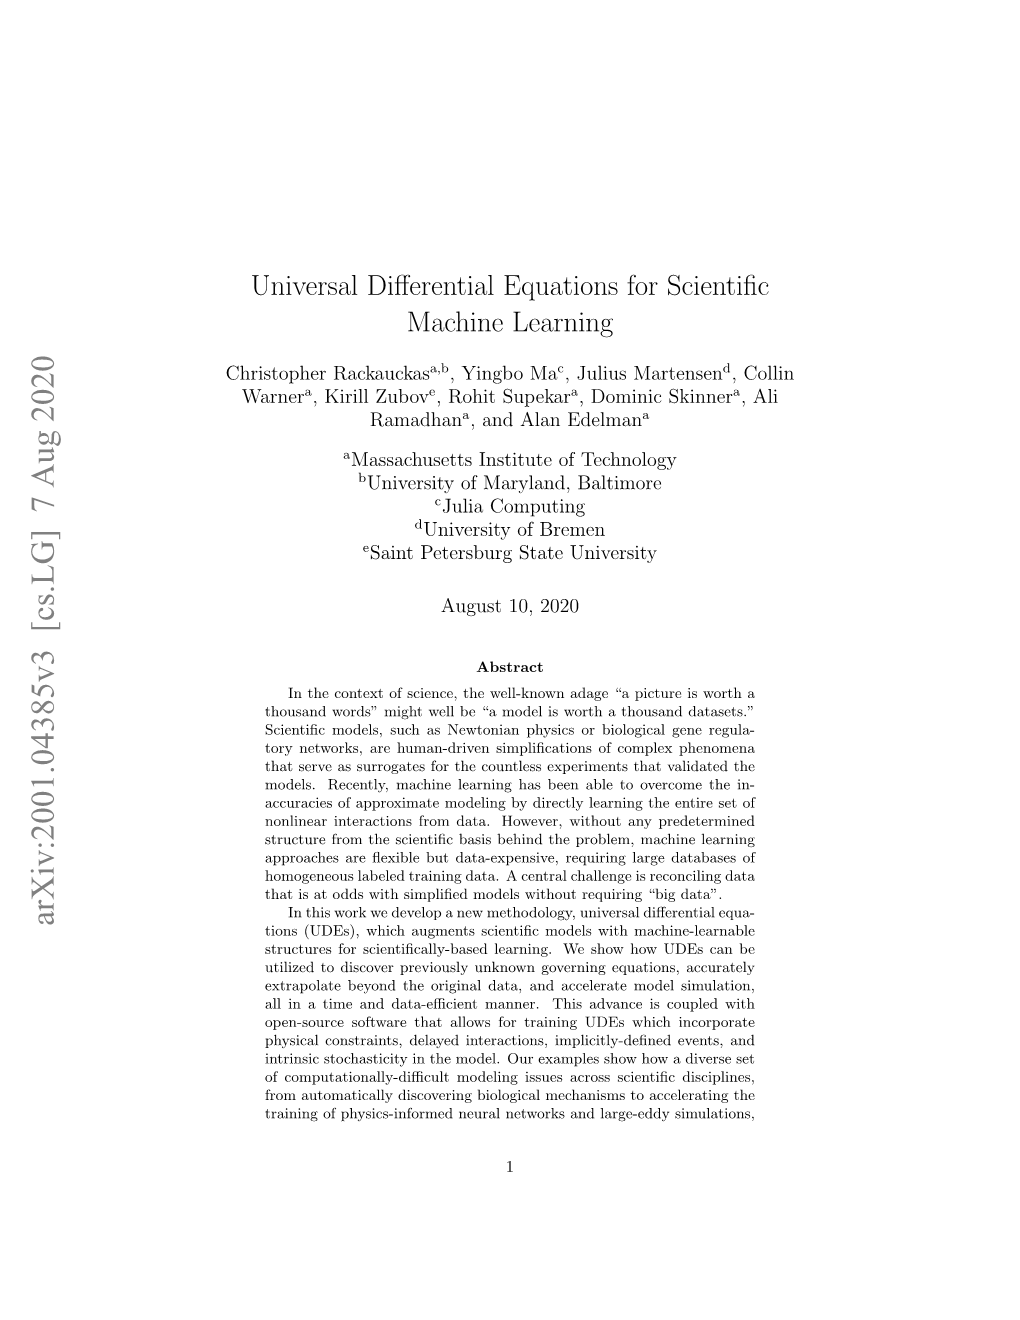 Universal Differential Equations for Scientific Machine Learning